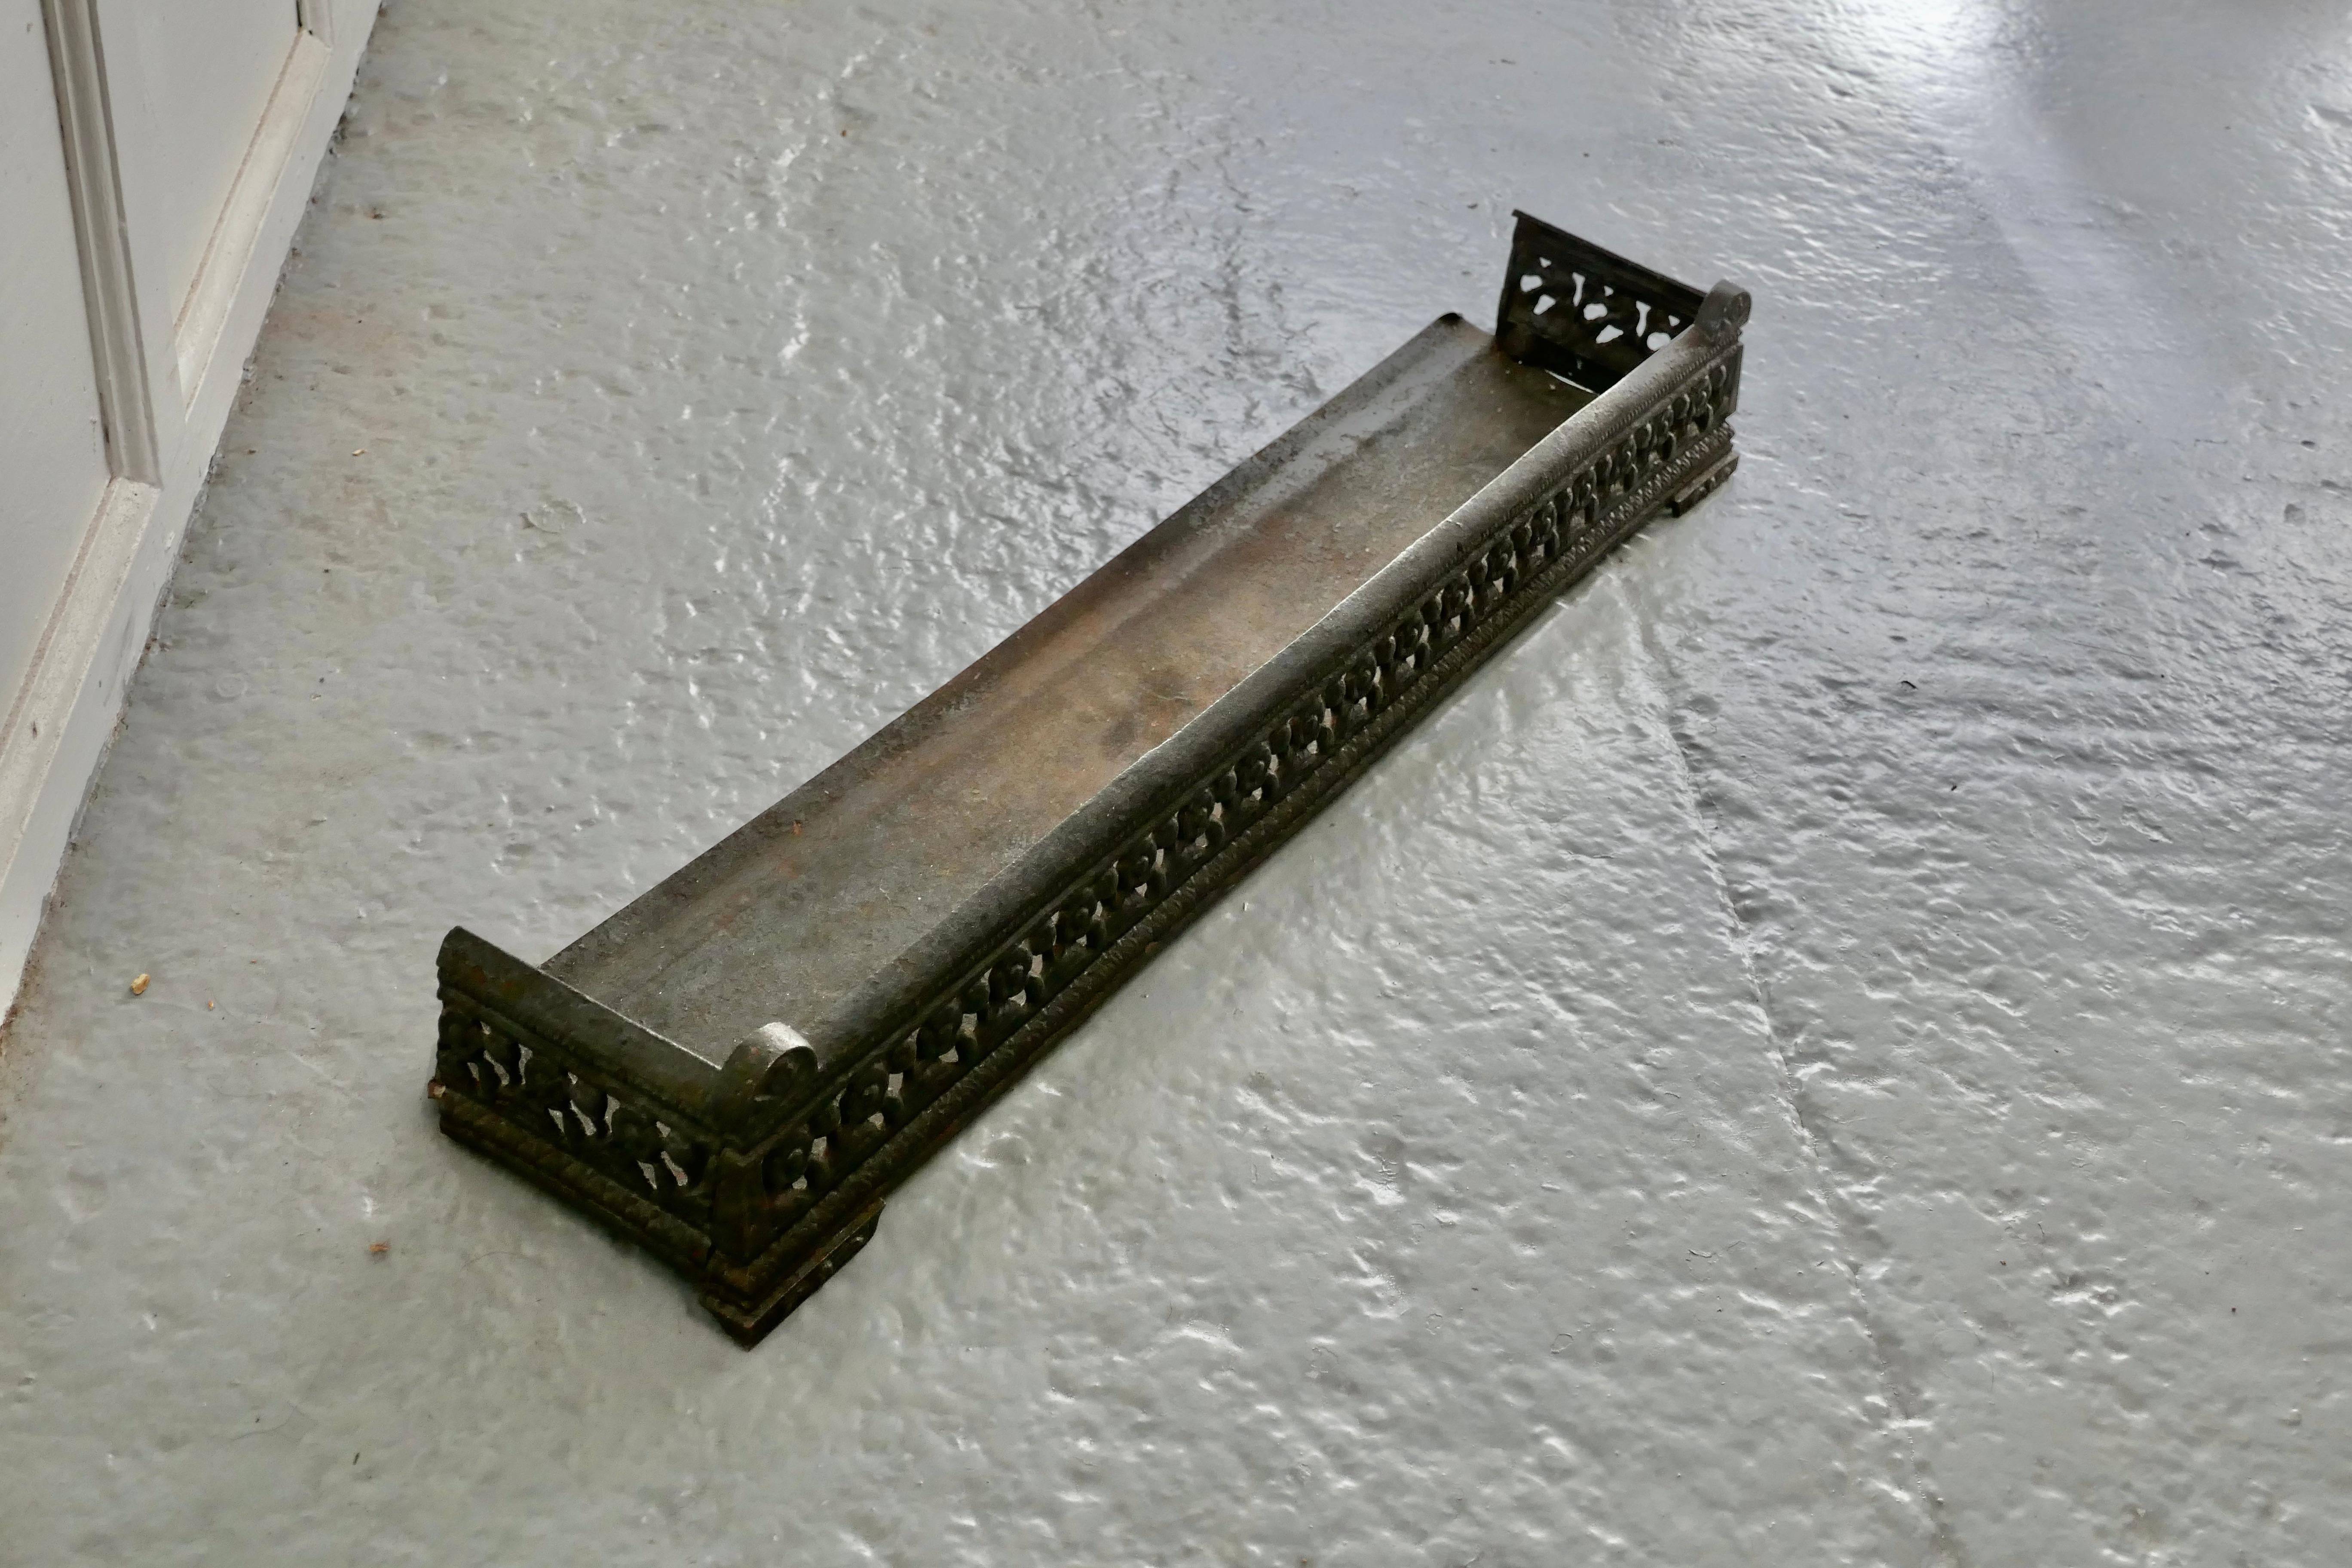 Victorian cast iron fender or dog grate.

This is a good Victorian fender it is good and heavy, fenders like this were known a dog grates as they serve to rest the fire tools and keep any rolling ash in check
The fender is in good sound condition